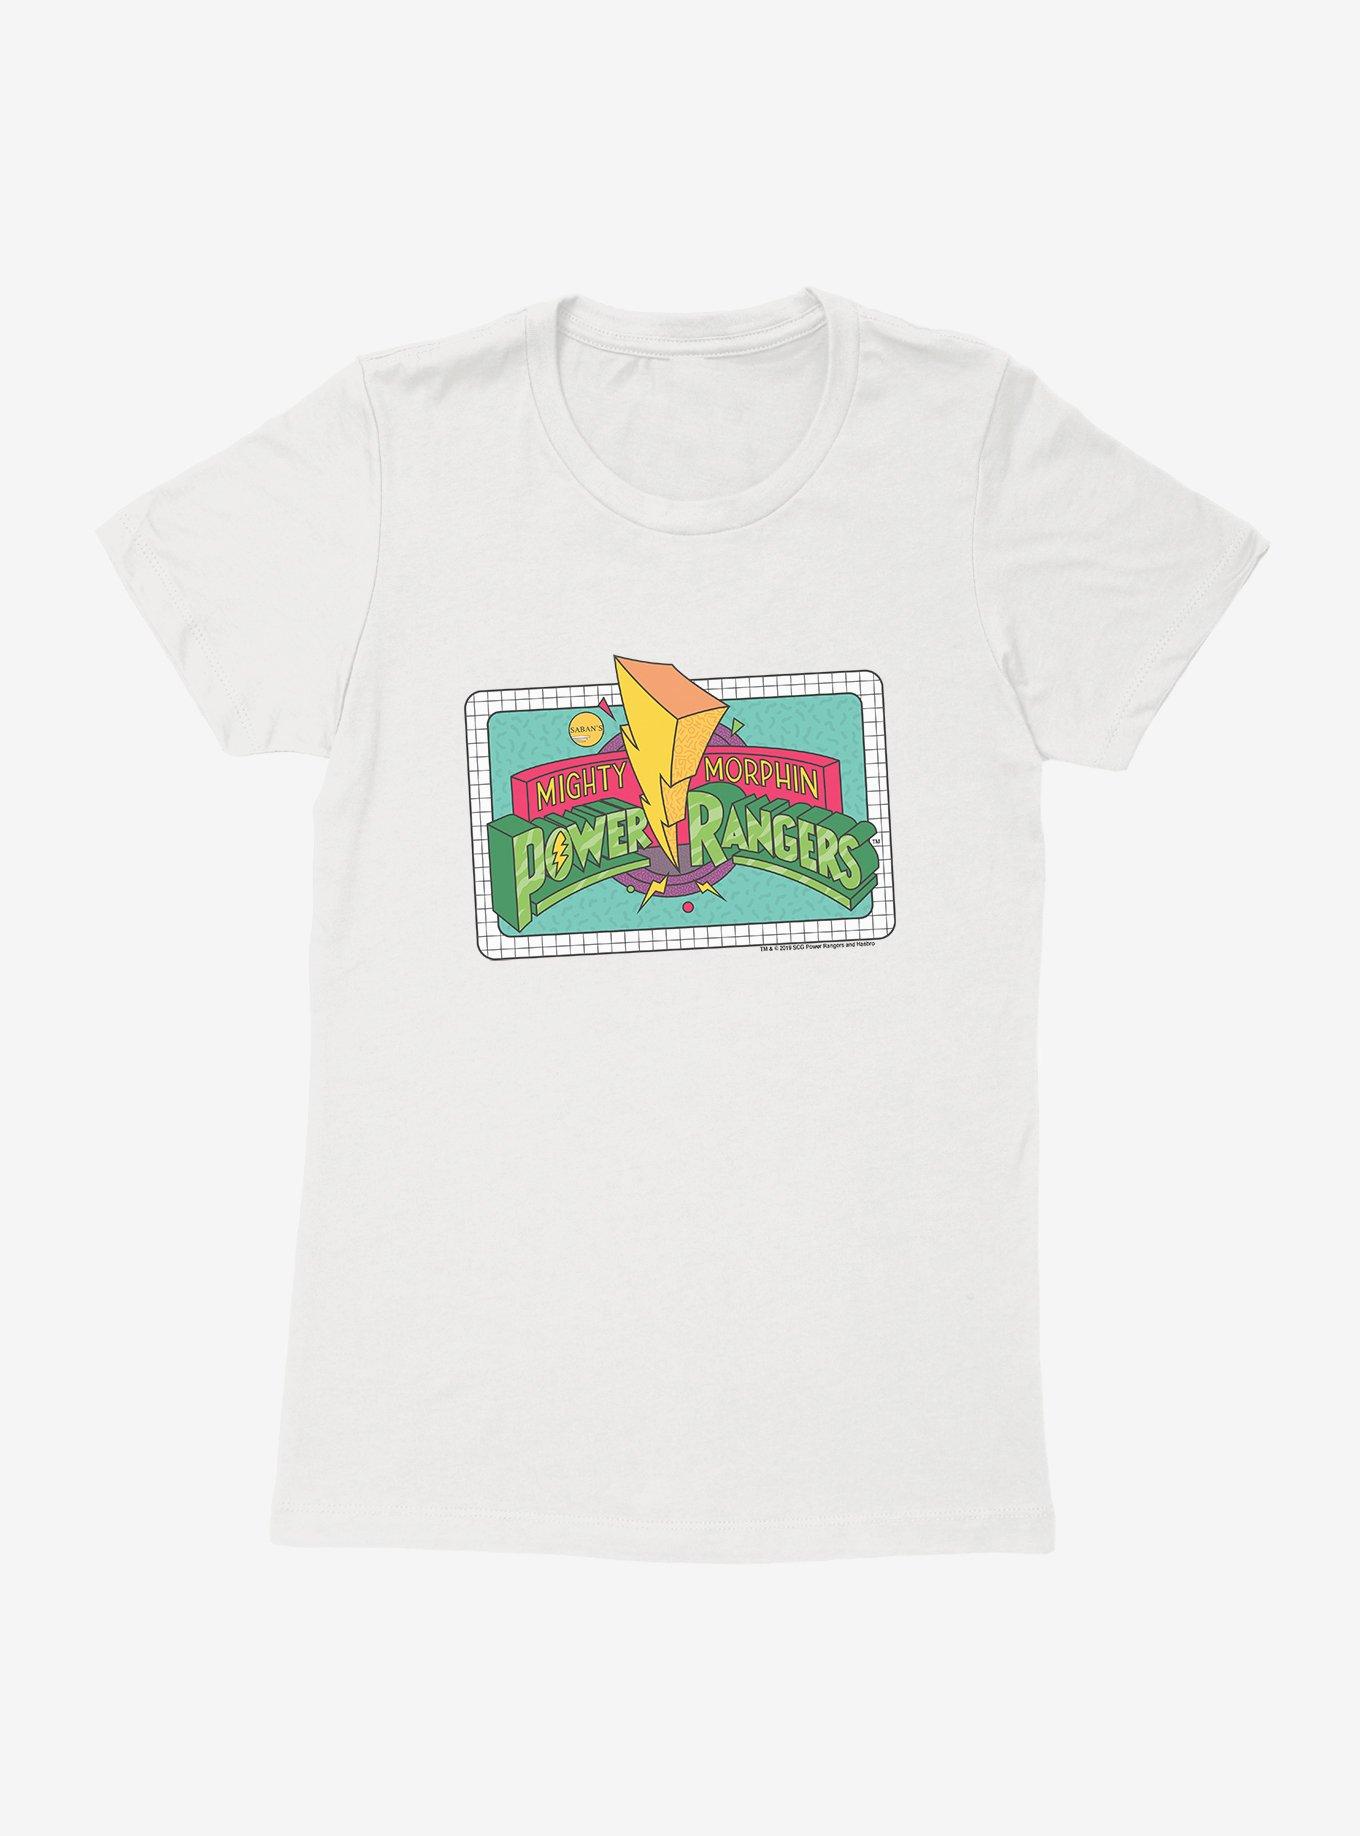 Mighty Morphin Power Rangers Color Sketch Logo Womens T-Shrt, WHITE, hi-res